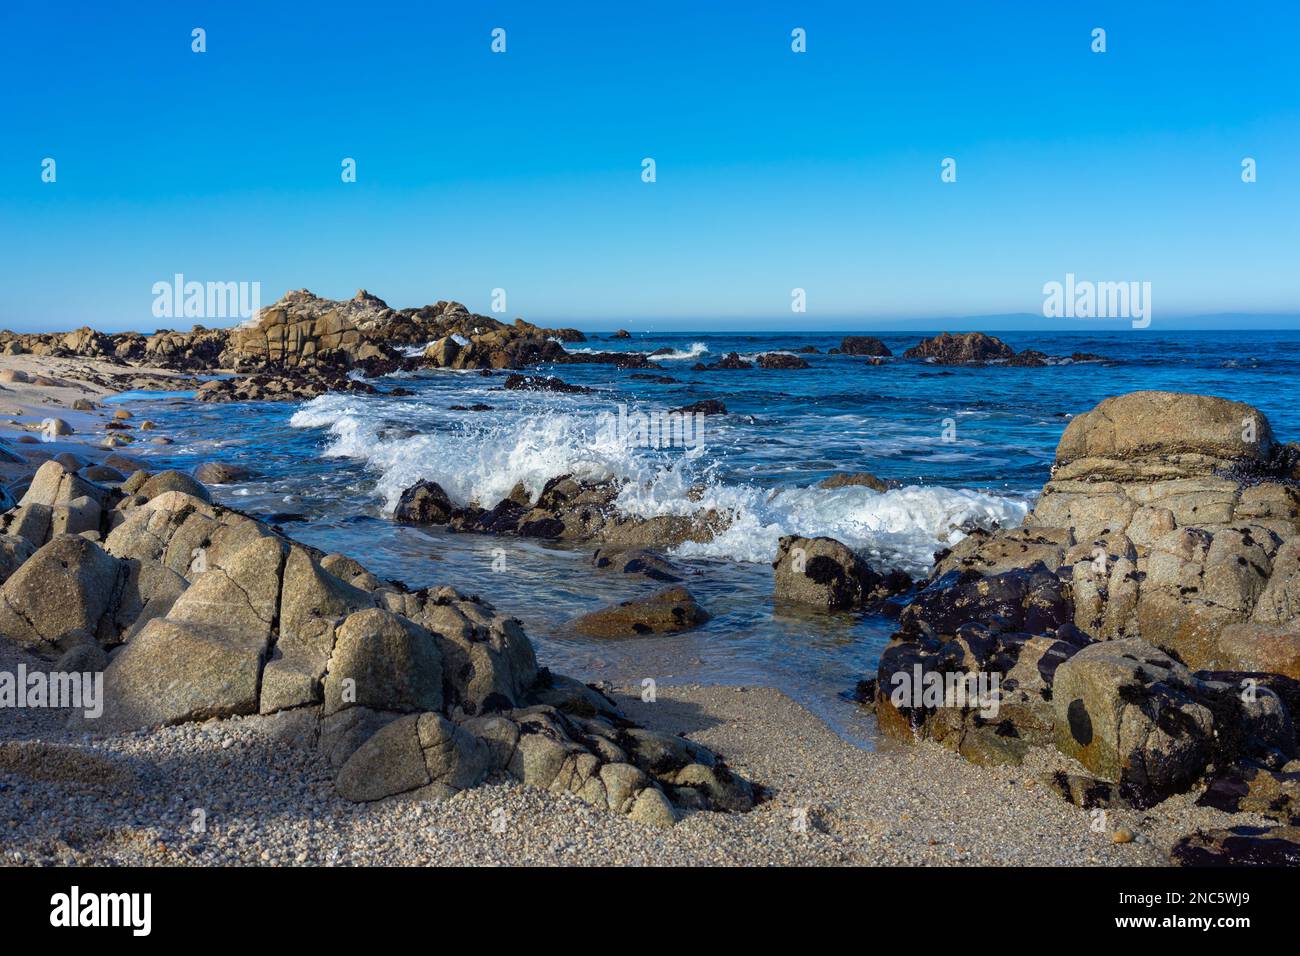 Beach with rock formations and crashing ocean wave at Monterey Bay Stock Photo